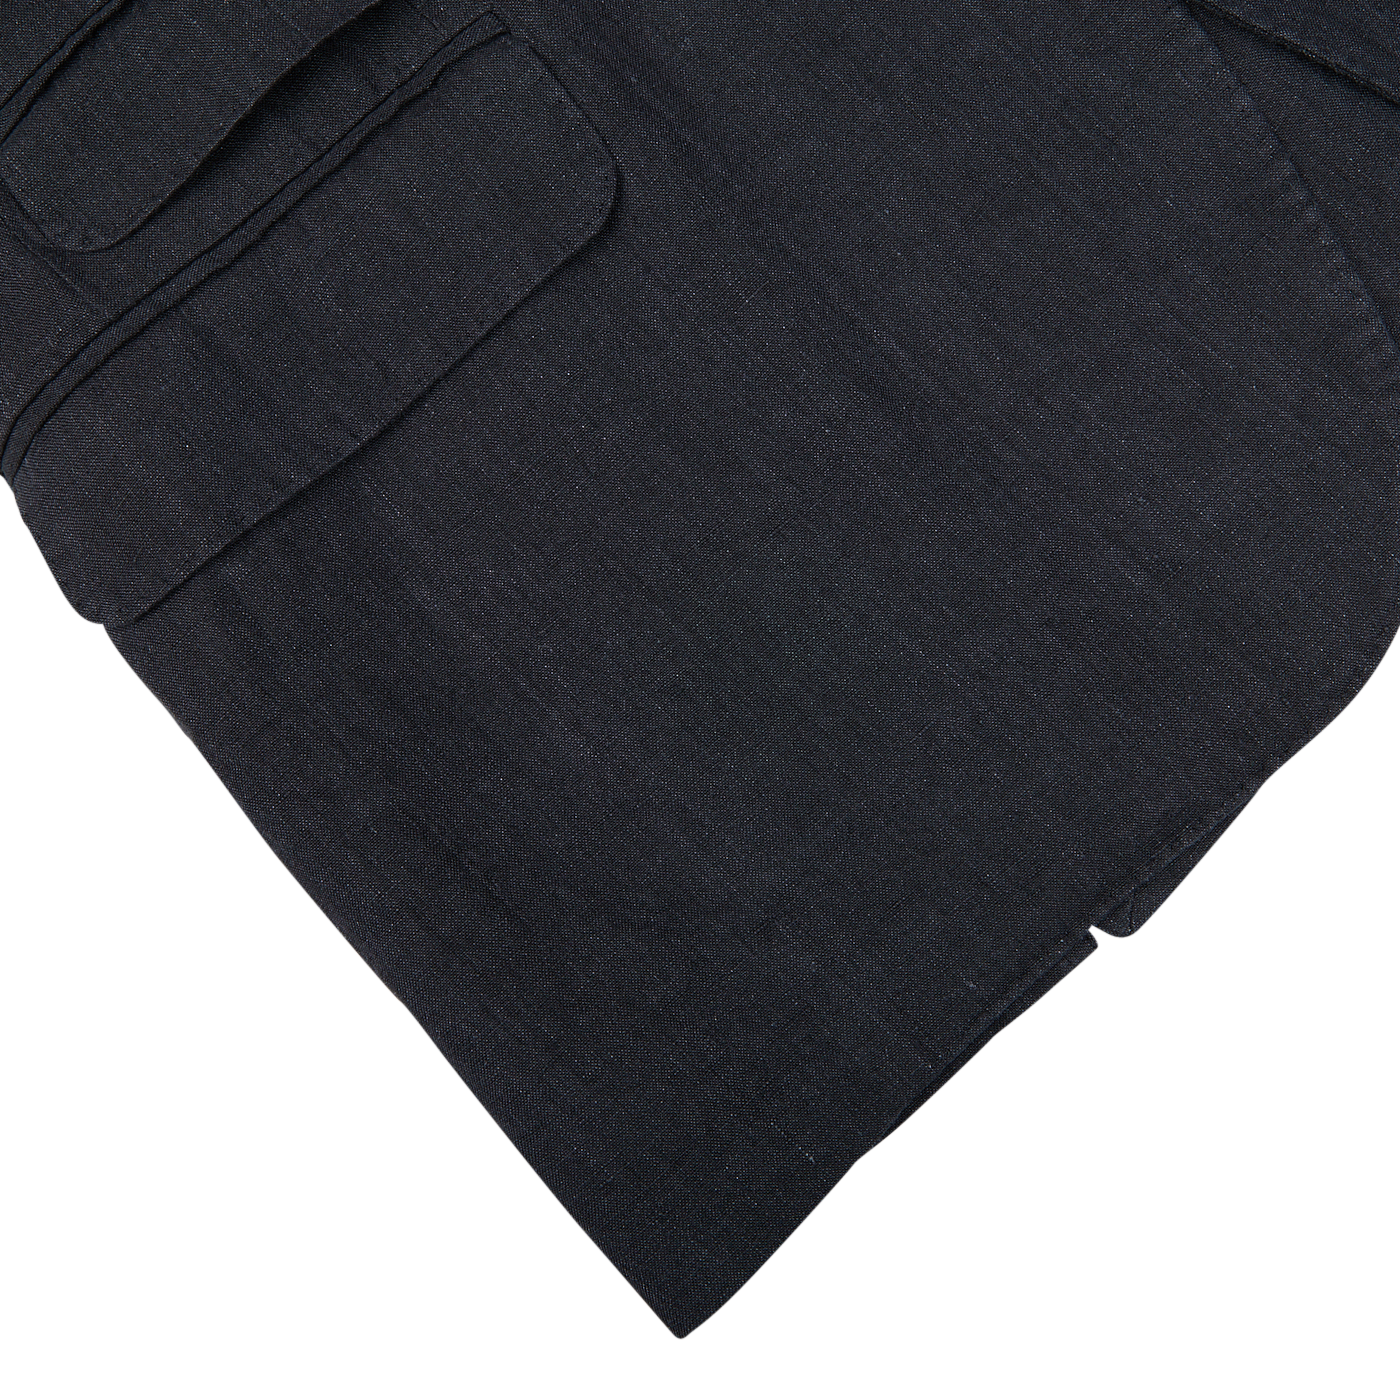 Close-up of a dark navy Massimo Alba Black Washed Linen Unstructured Blazer fabric with pocket detail on a white background.